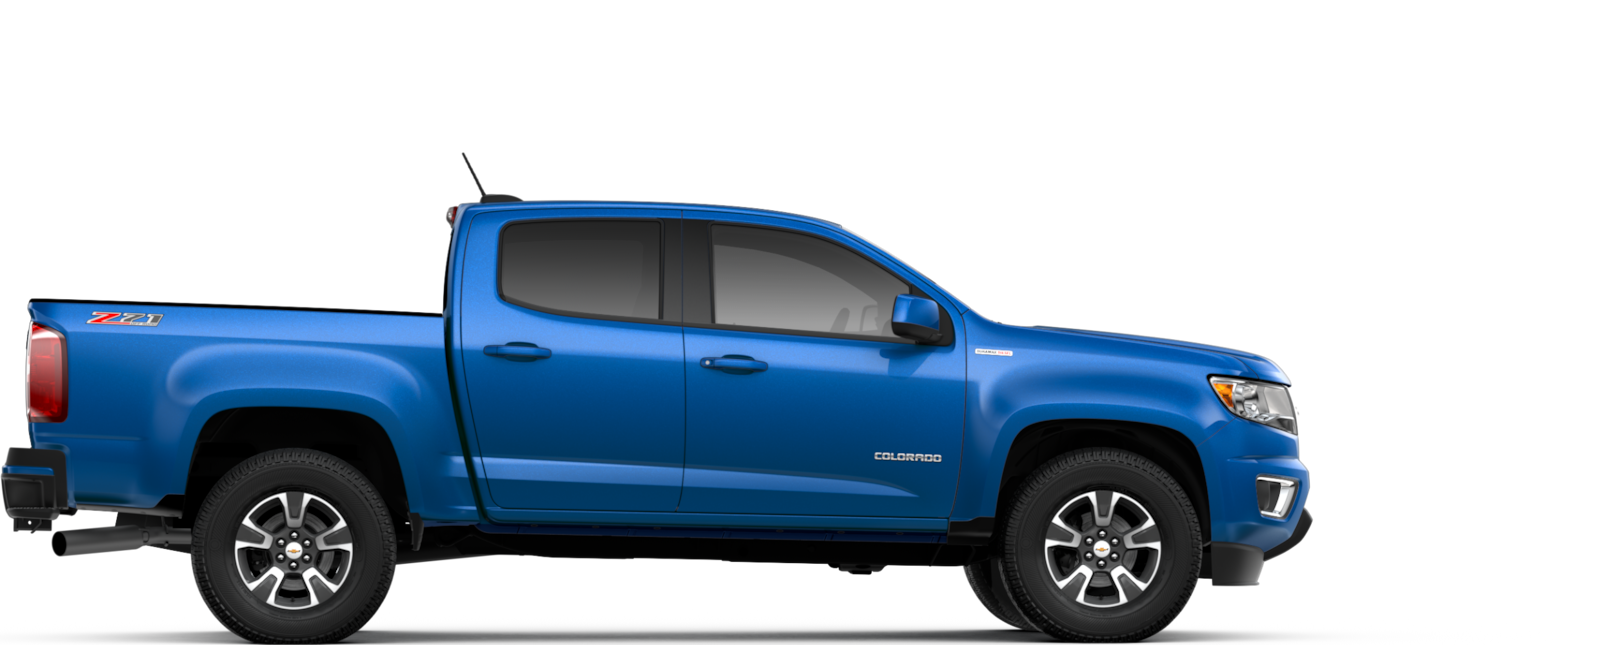 Download PNG image - Pickup Truck PNG HD 